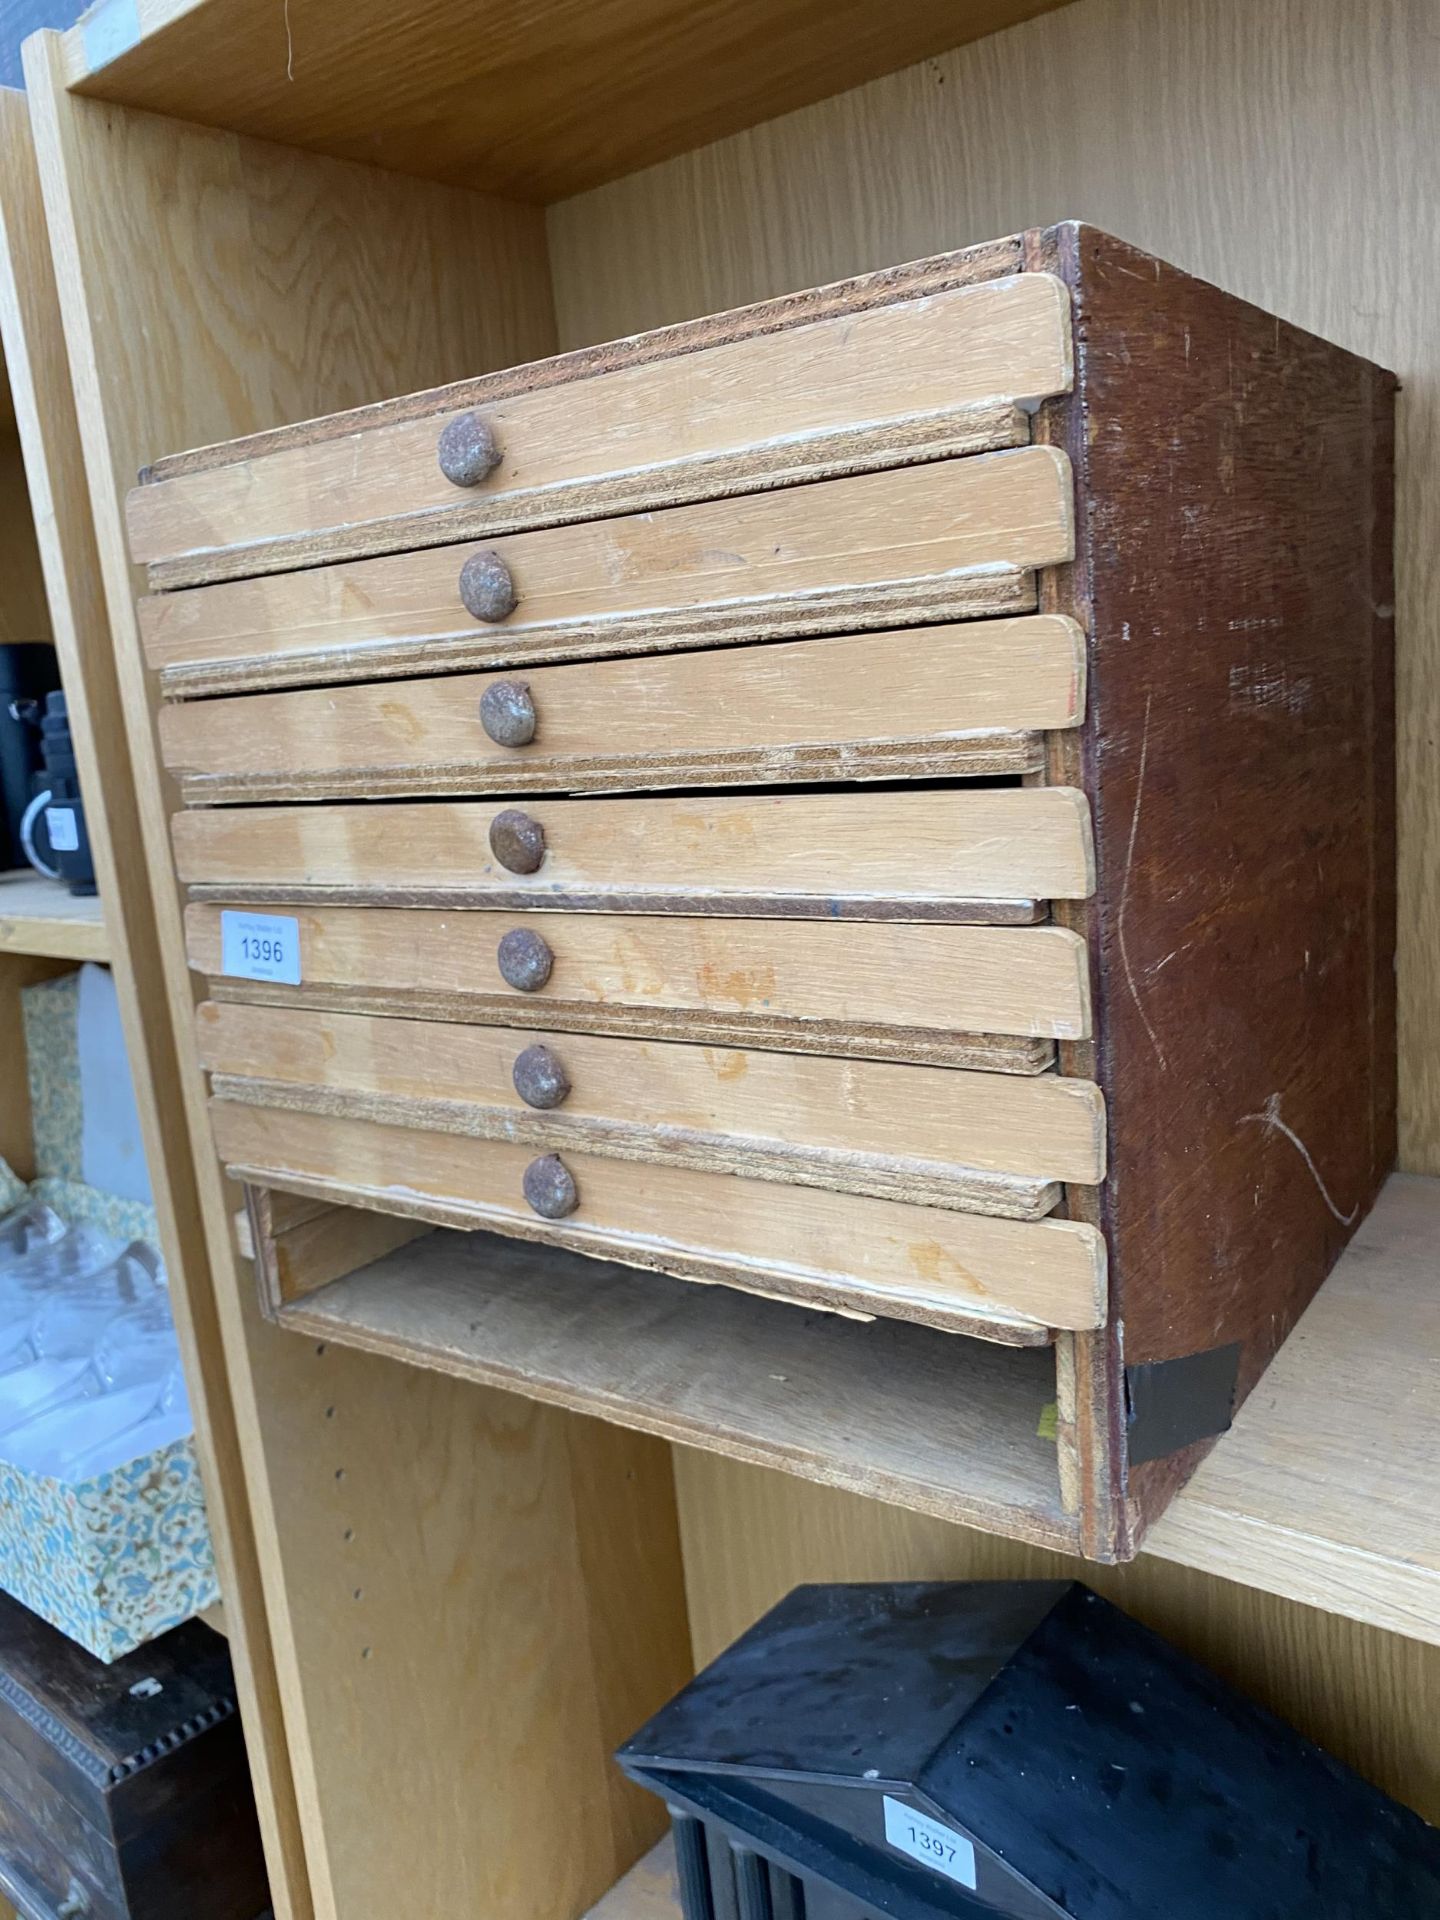 A HANDMADE MINITURE CHEST OF DRAWERS WITH ONE DRAWER MISSING - Image 2 of 2